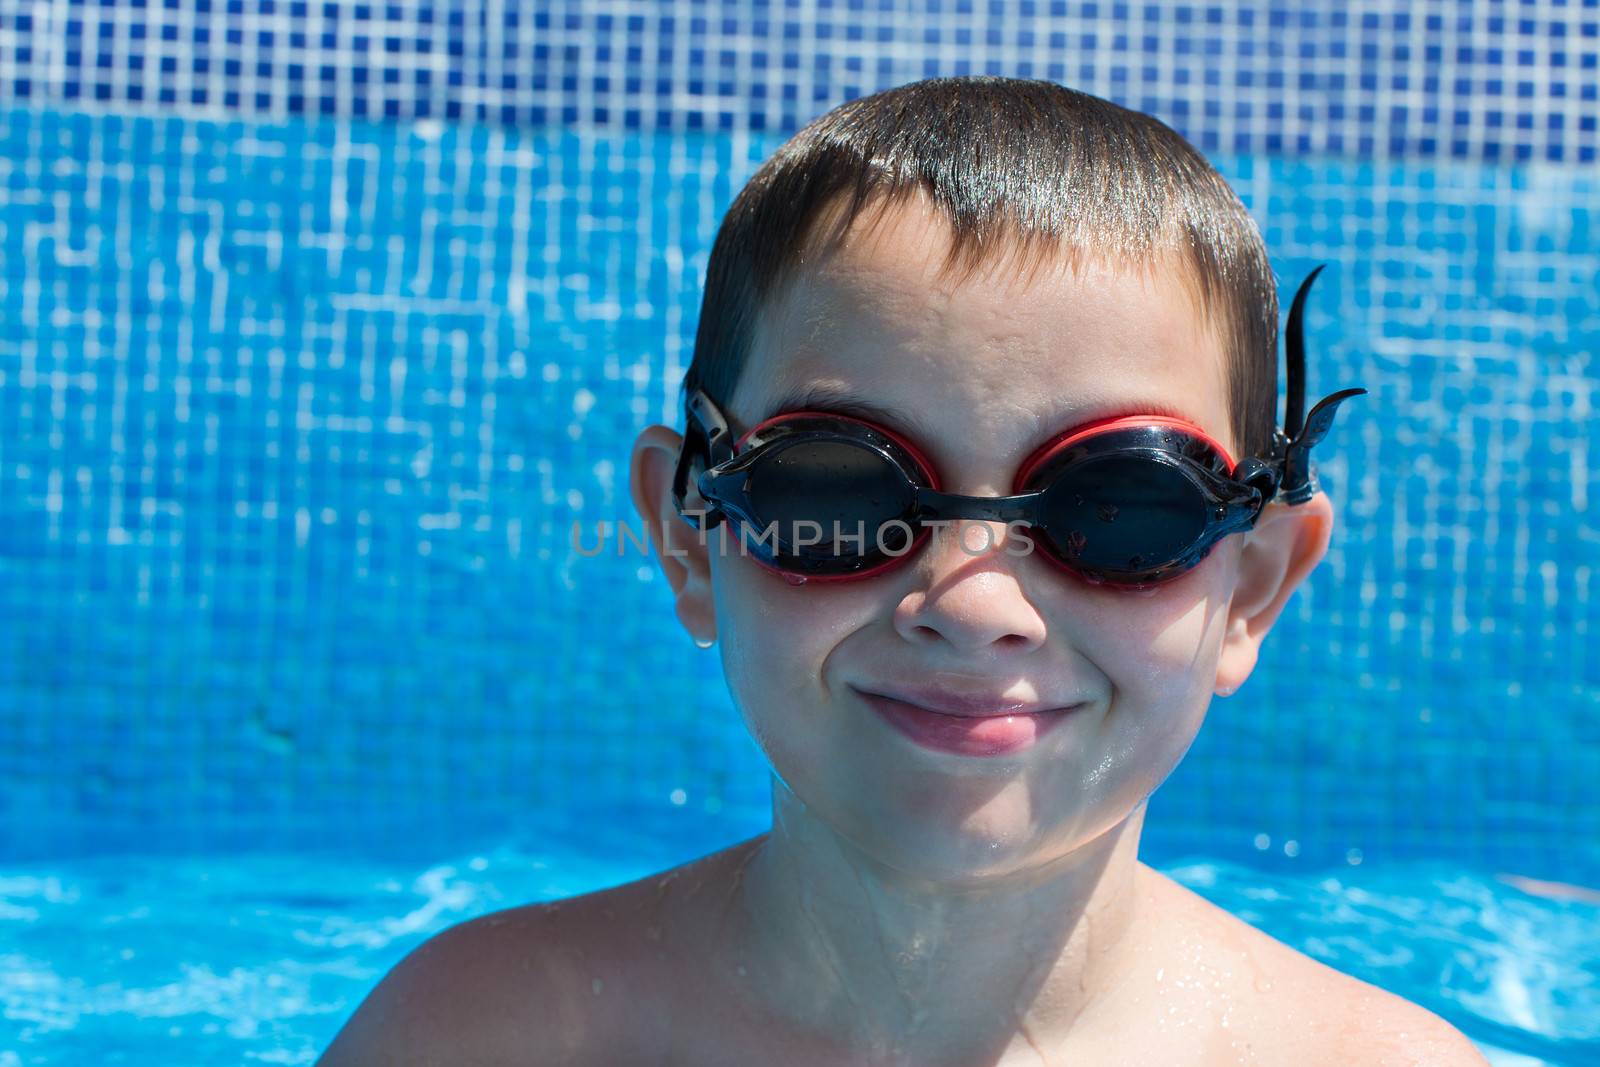 Eight years old kid in the swimming pool looking with his goggles